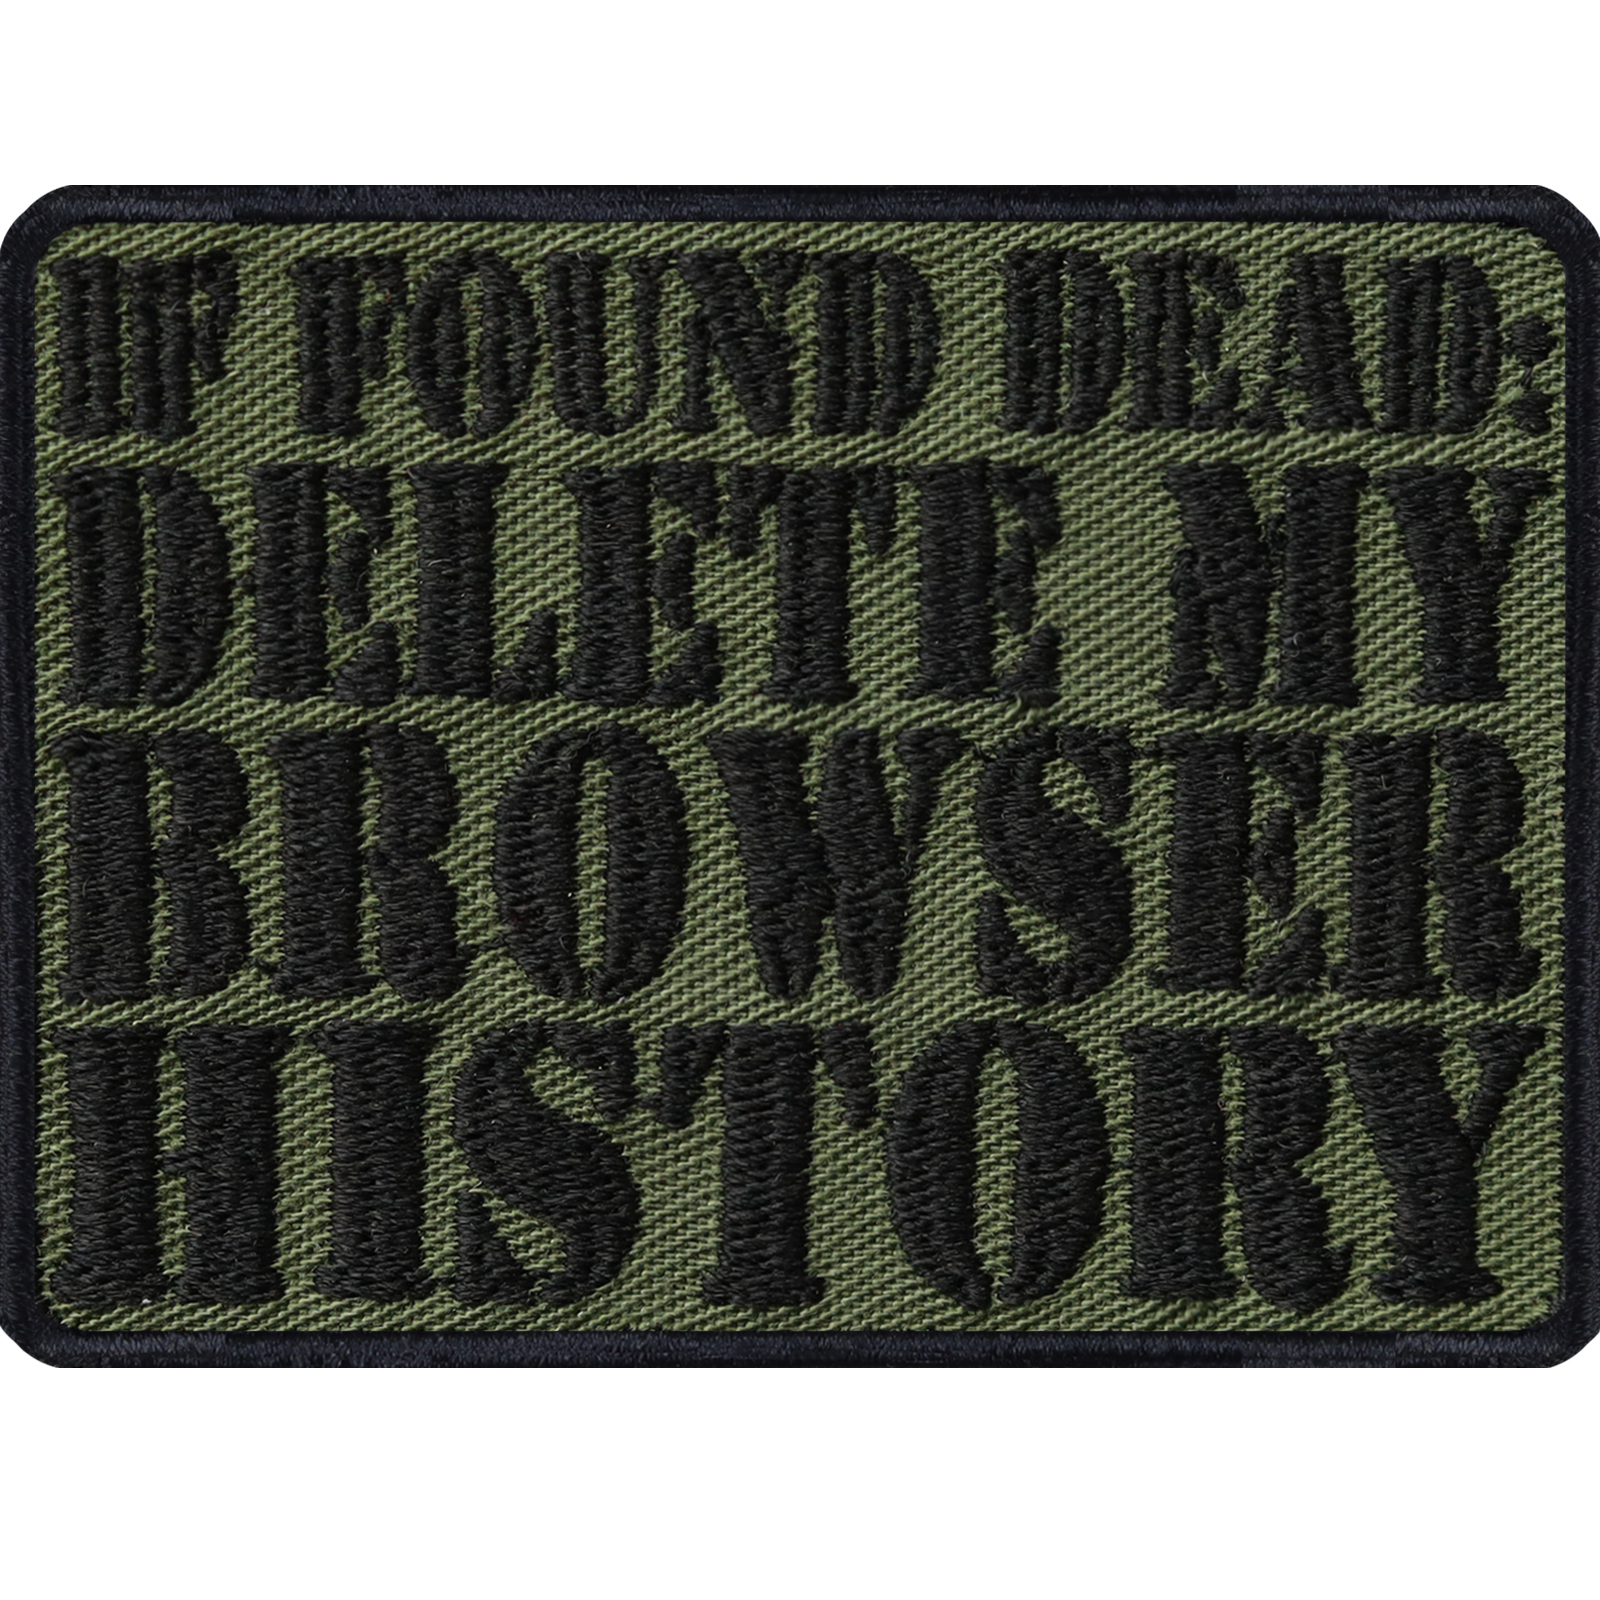 If found dead: Delete my browser history- Patch